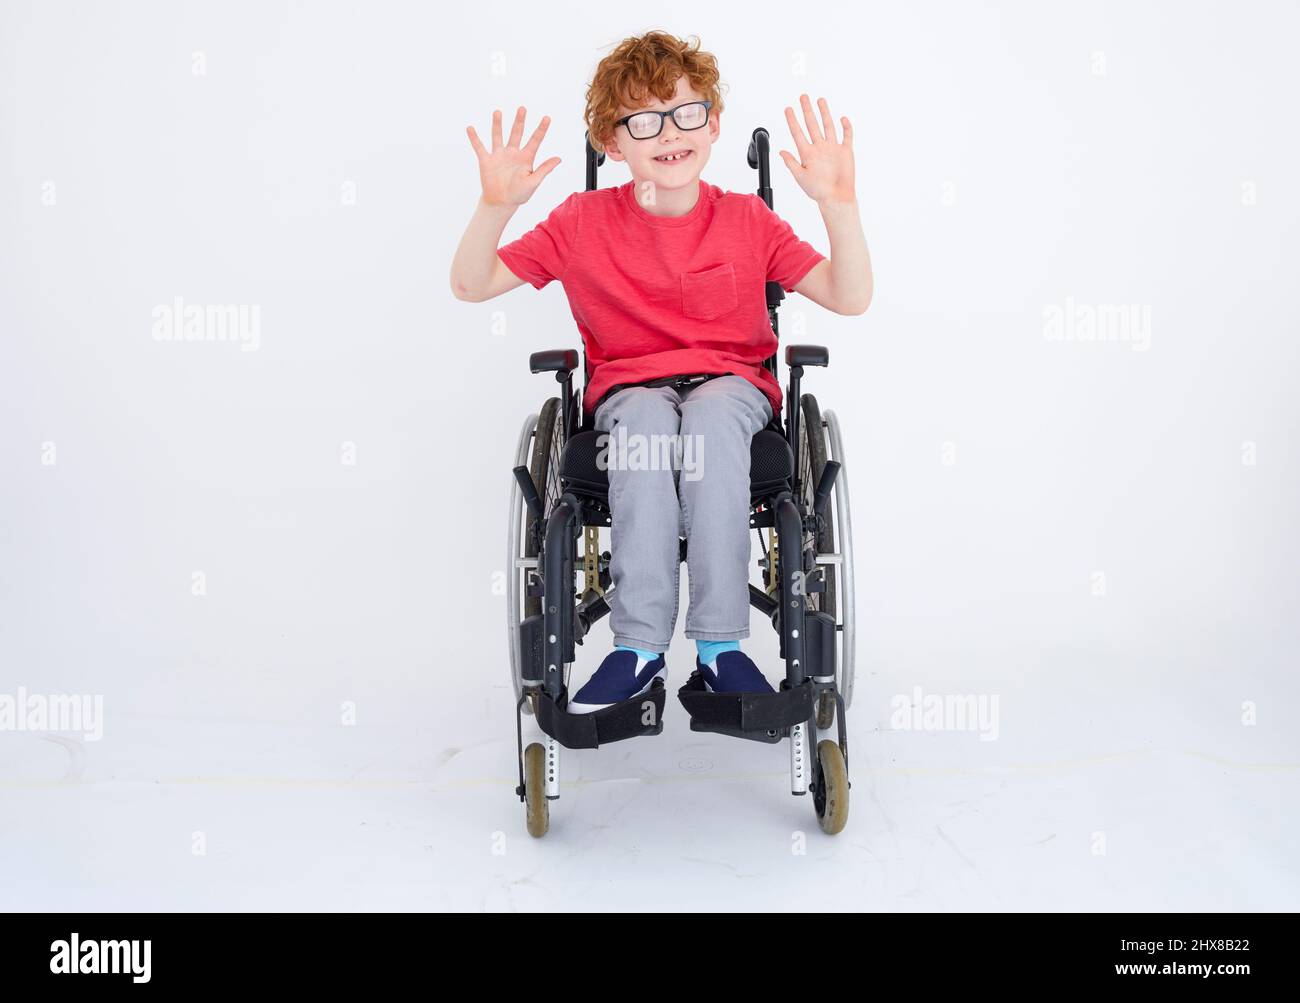 Boy in Send 10 Wishes Pose Stock Photo